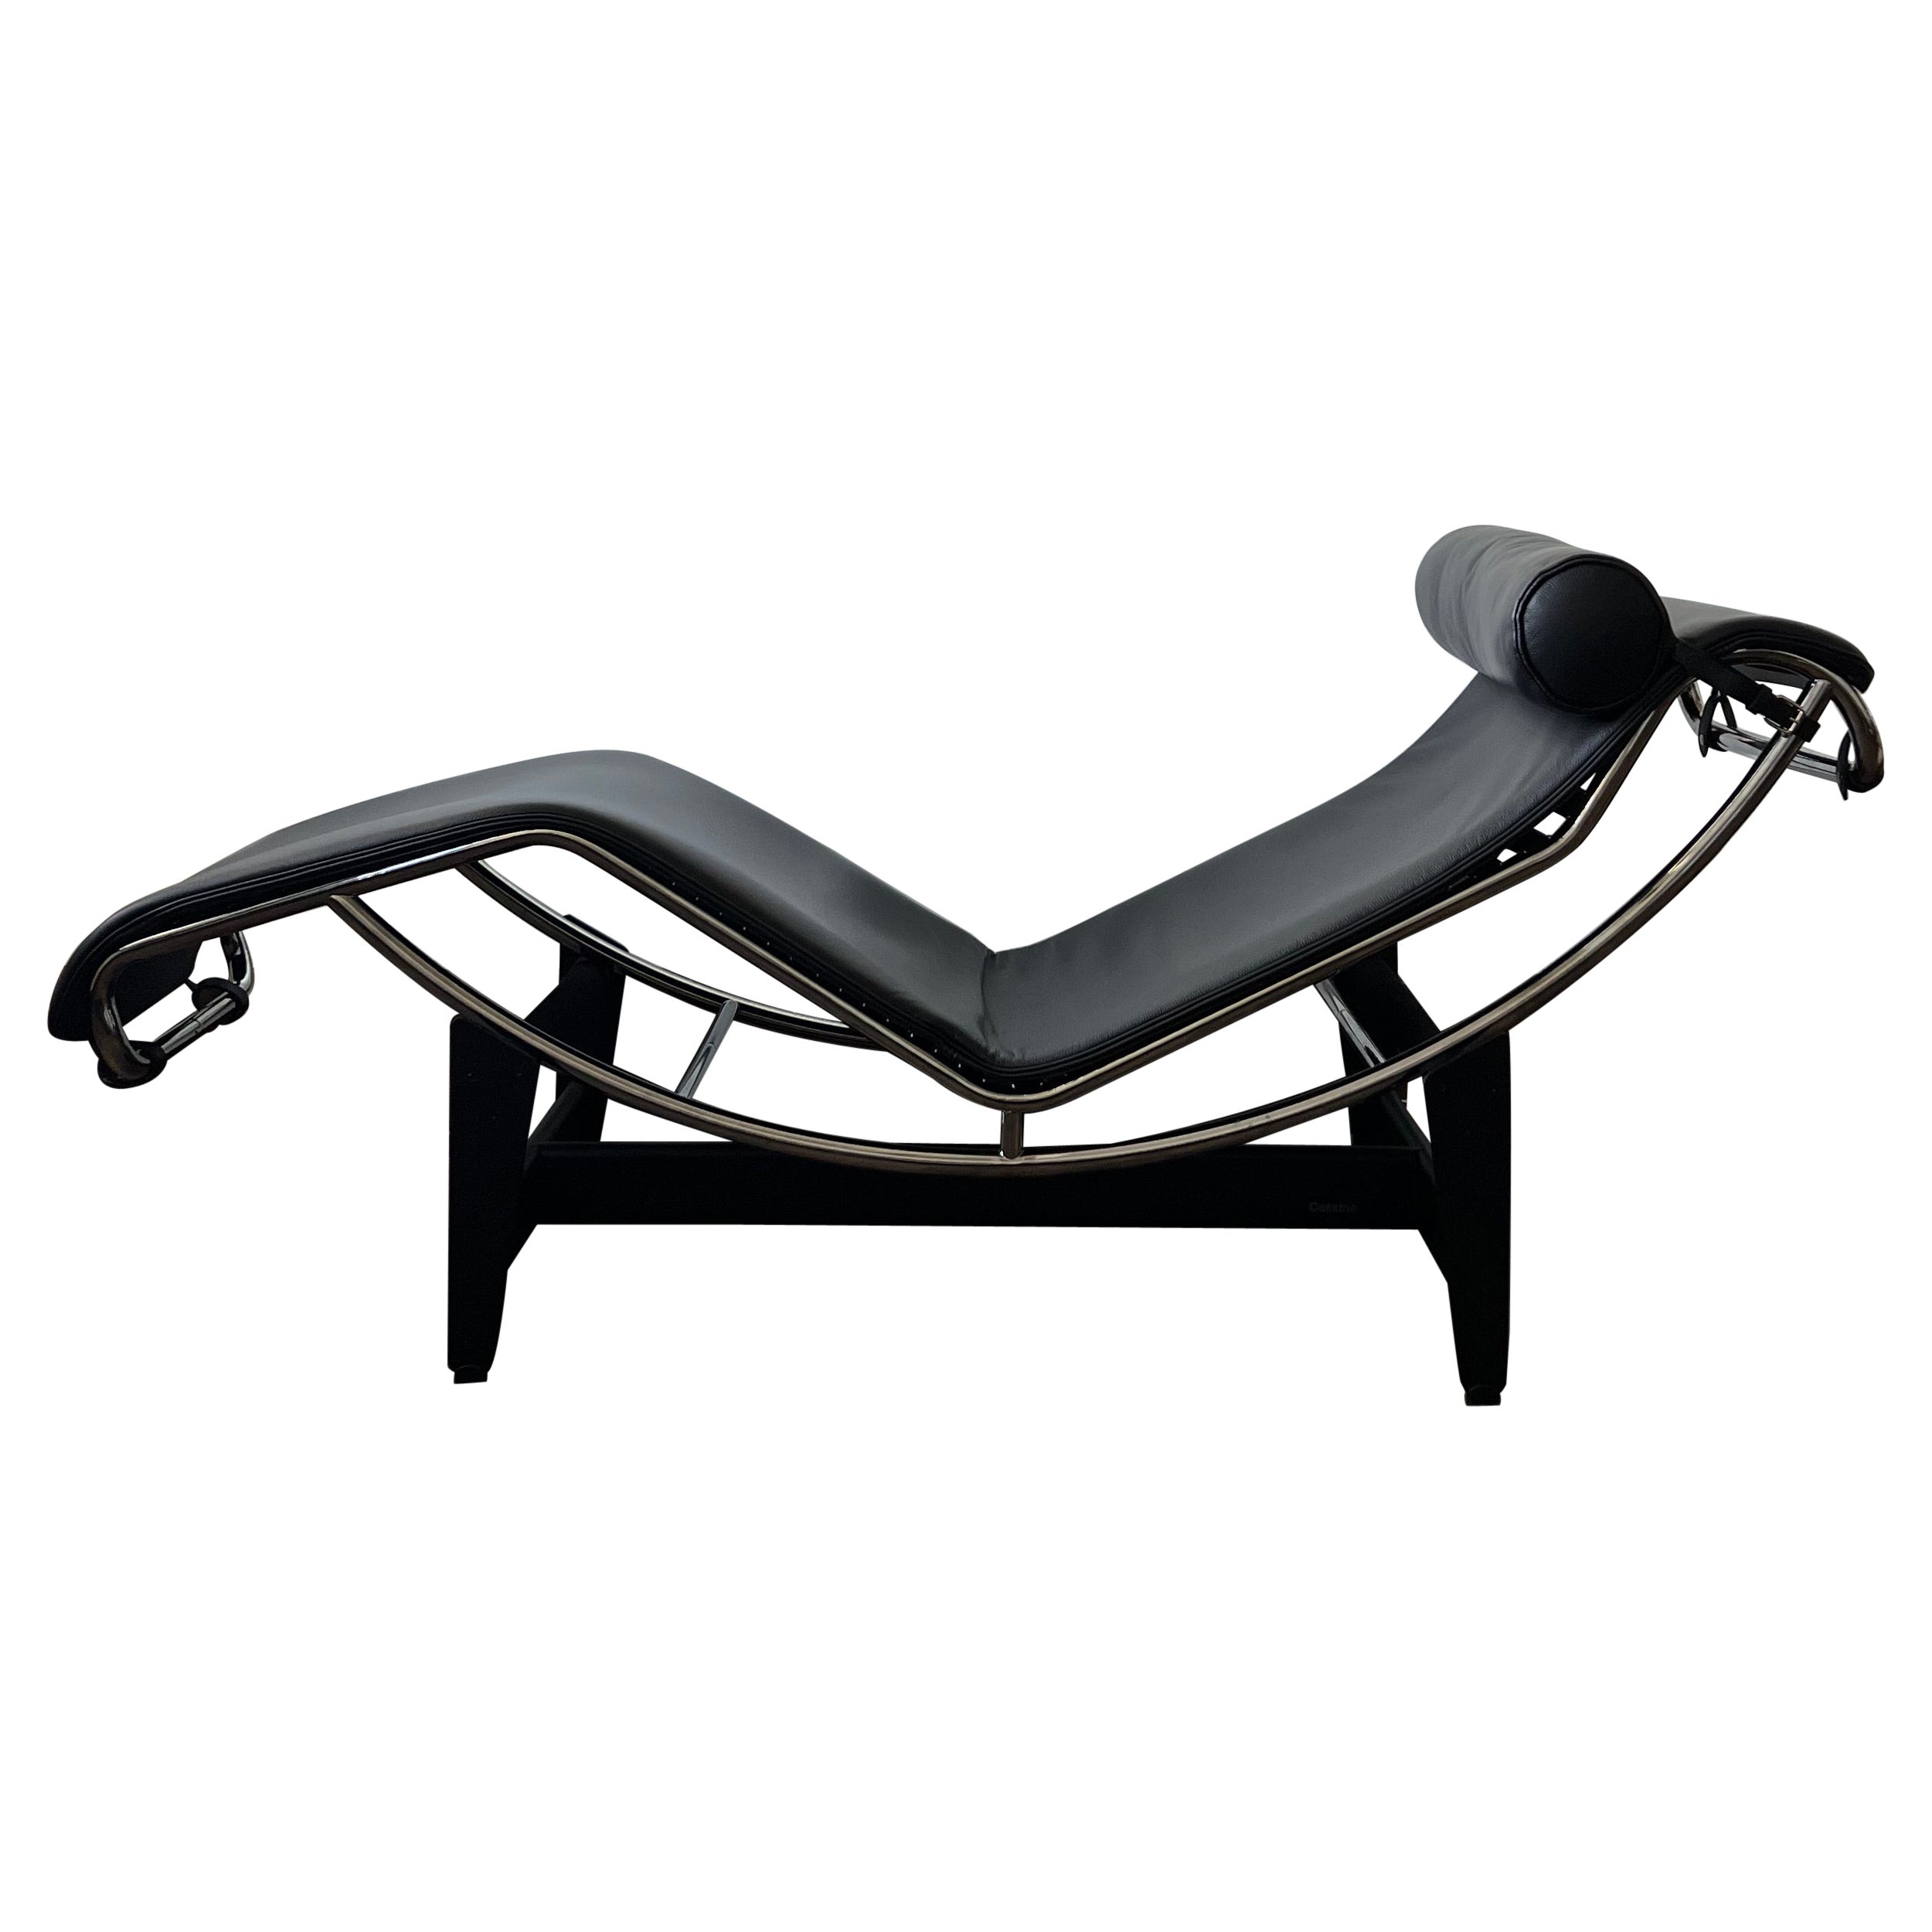 LC4 by Le Corbusier, Pierre Jeanneret, and Charlotte Perriand for Cassina